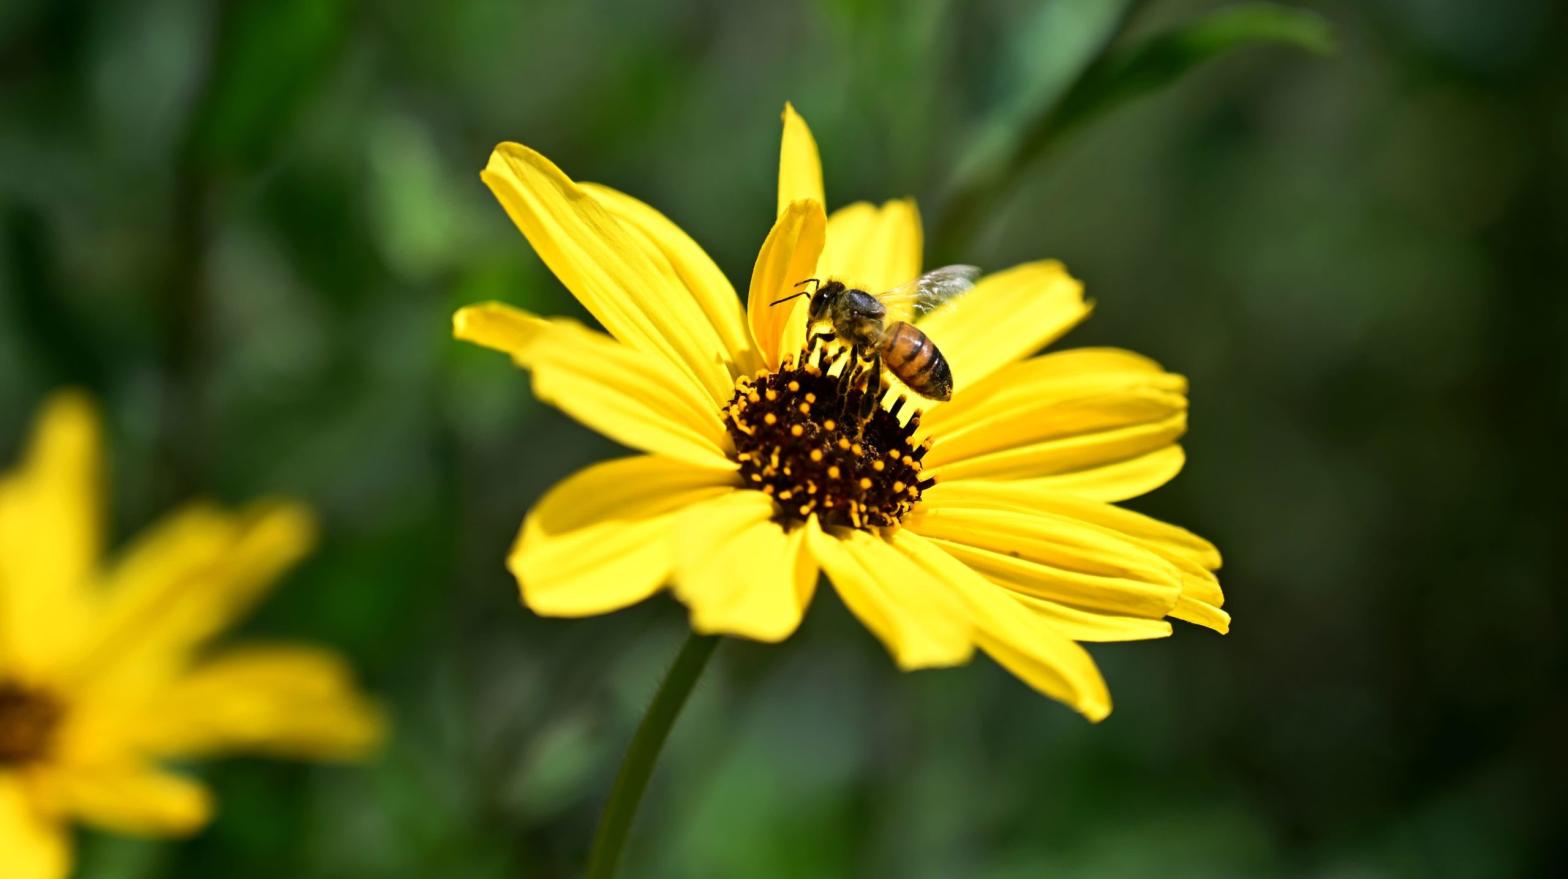 A bee lands on a wild flower along the Eaton Canyon Trail in Pasadena, California. (Photo: Frederic J. Brown, Getty Images)